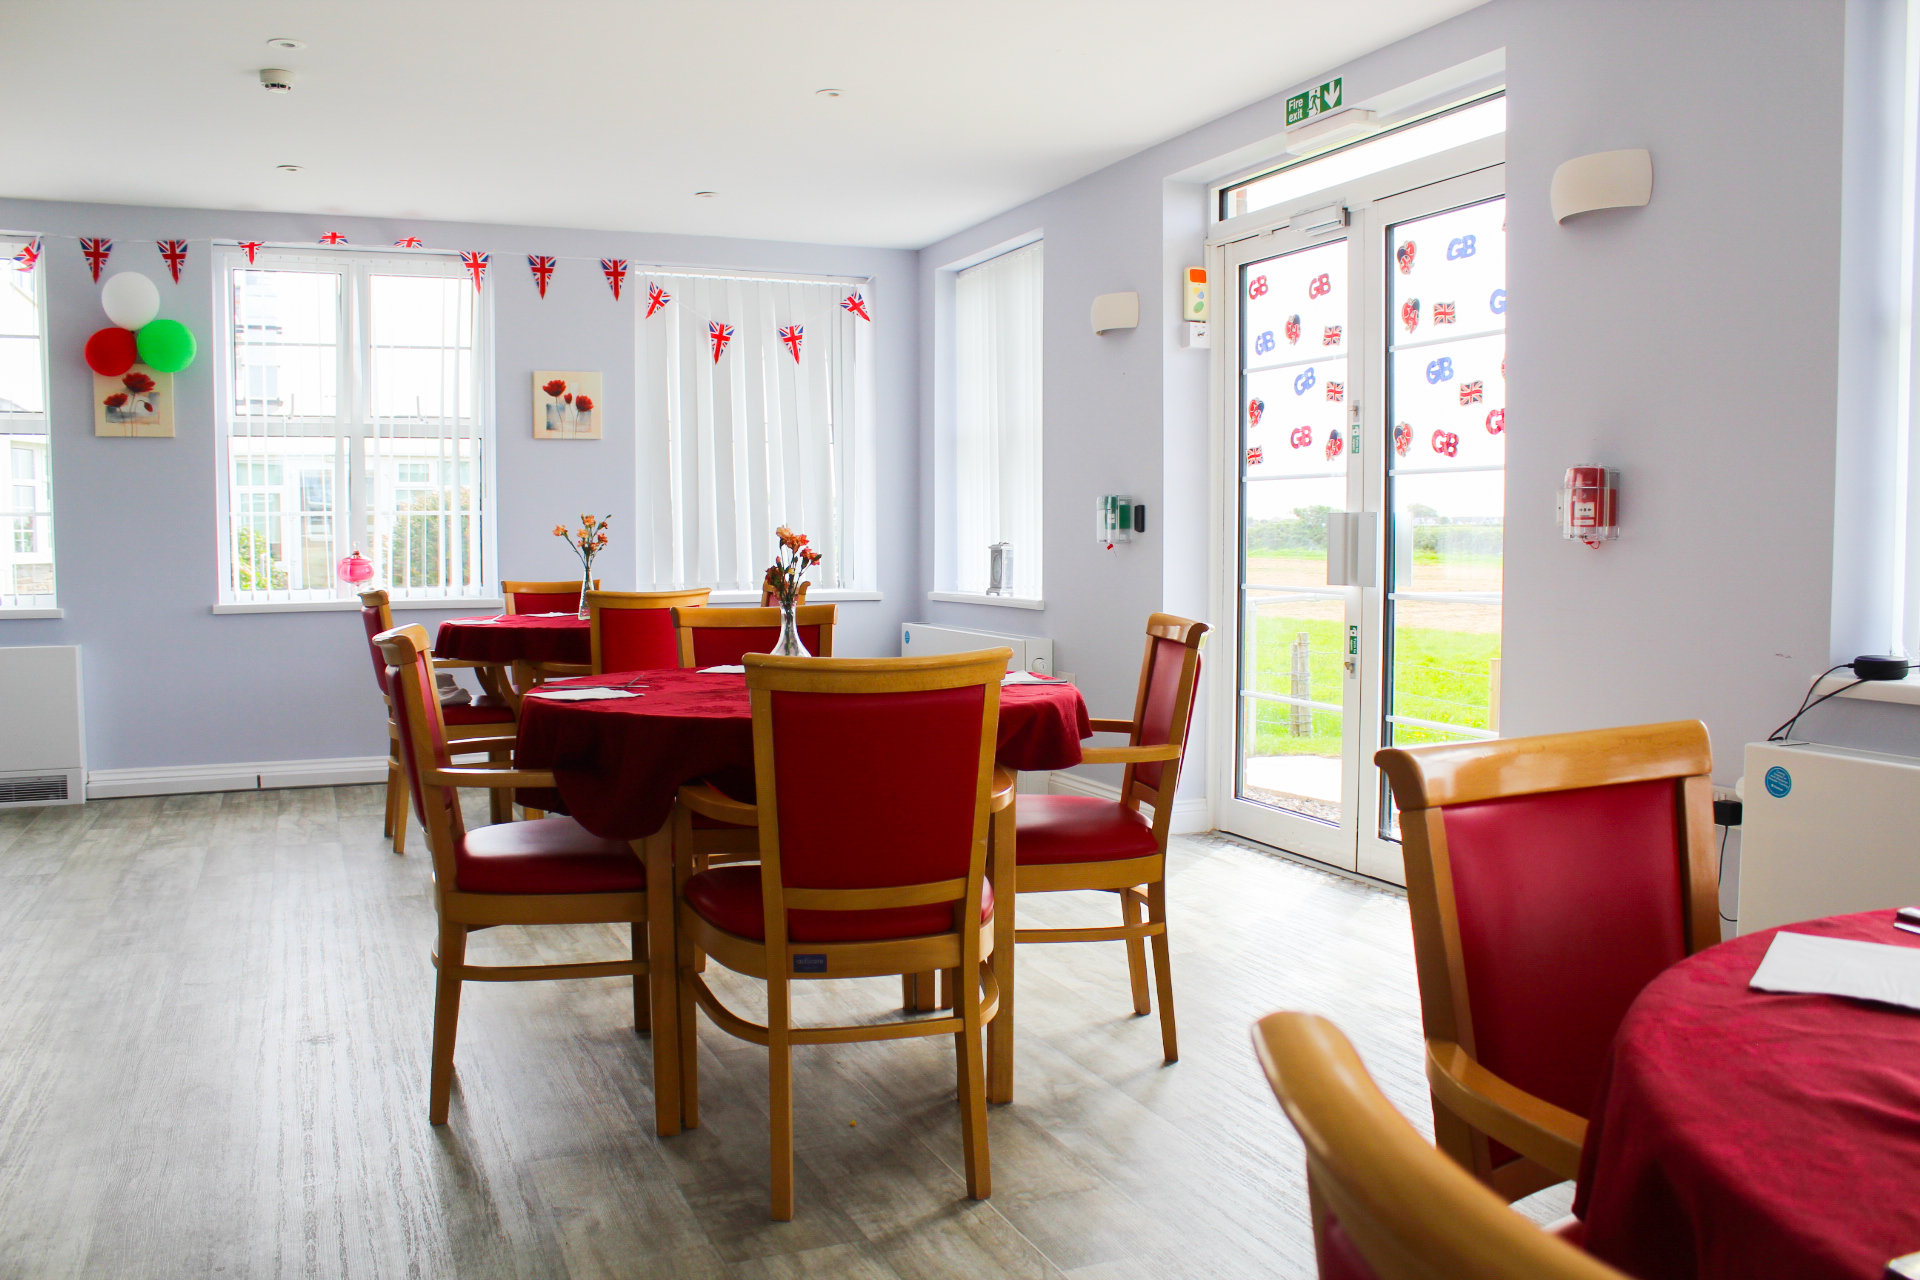 Dining room at Picton Court Care Home